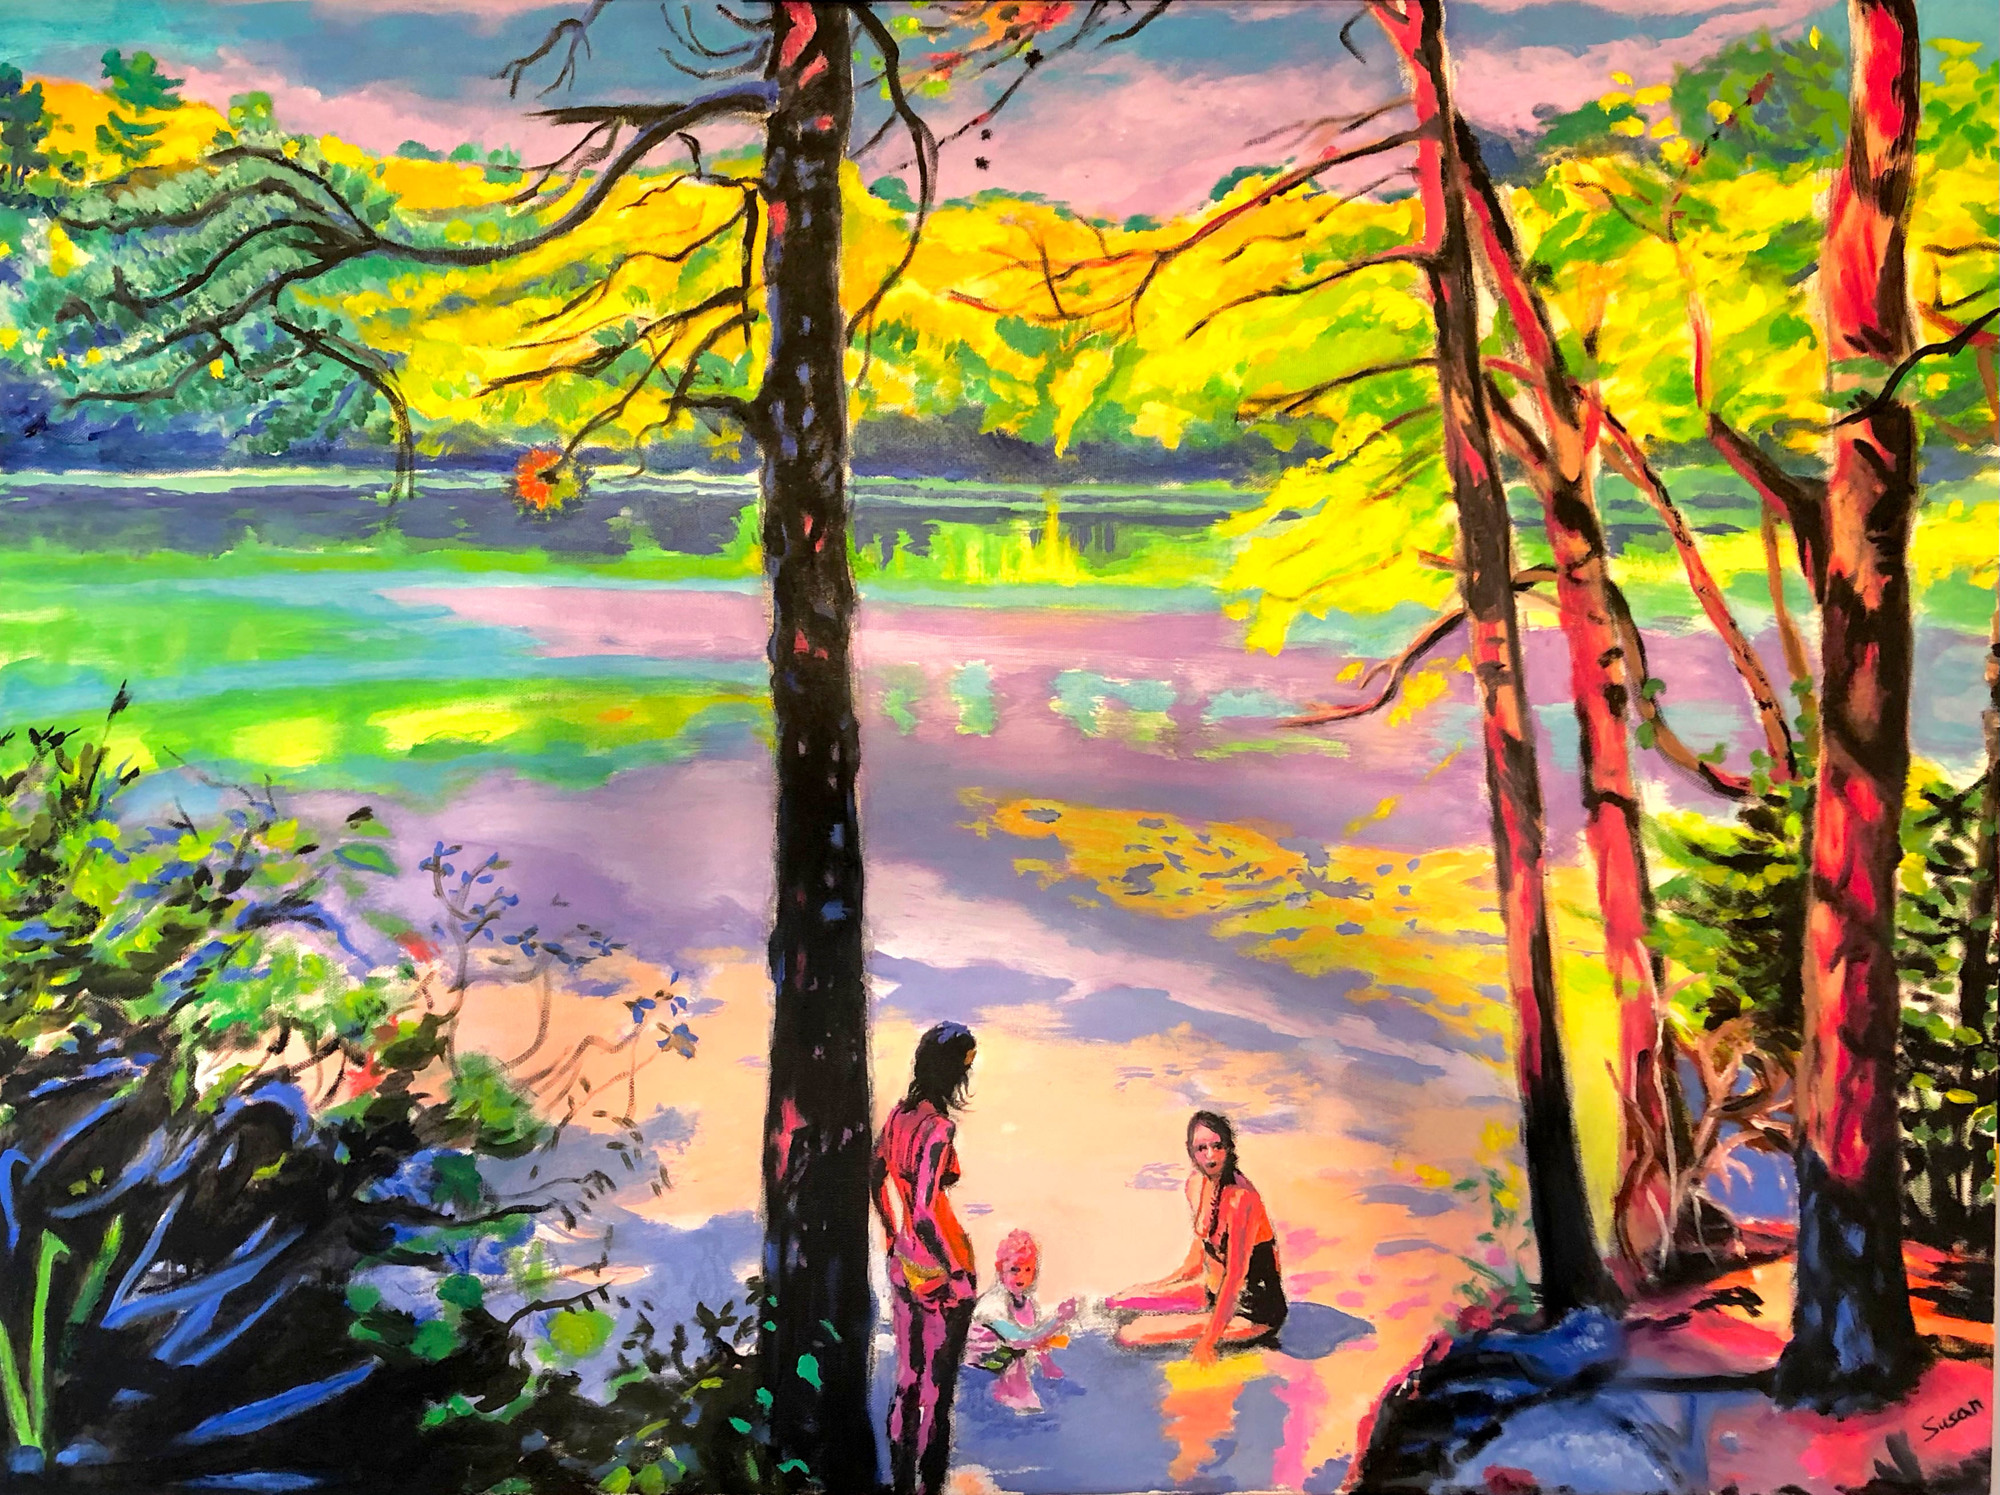 Bathers at Eagle Pond by Susan Stewart is one of the entries in the exhibit at Art Center Sarasota. (Courtesy photo)